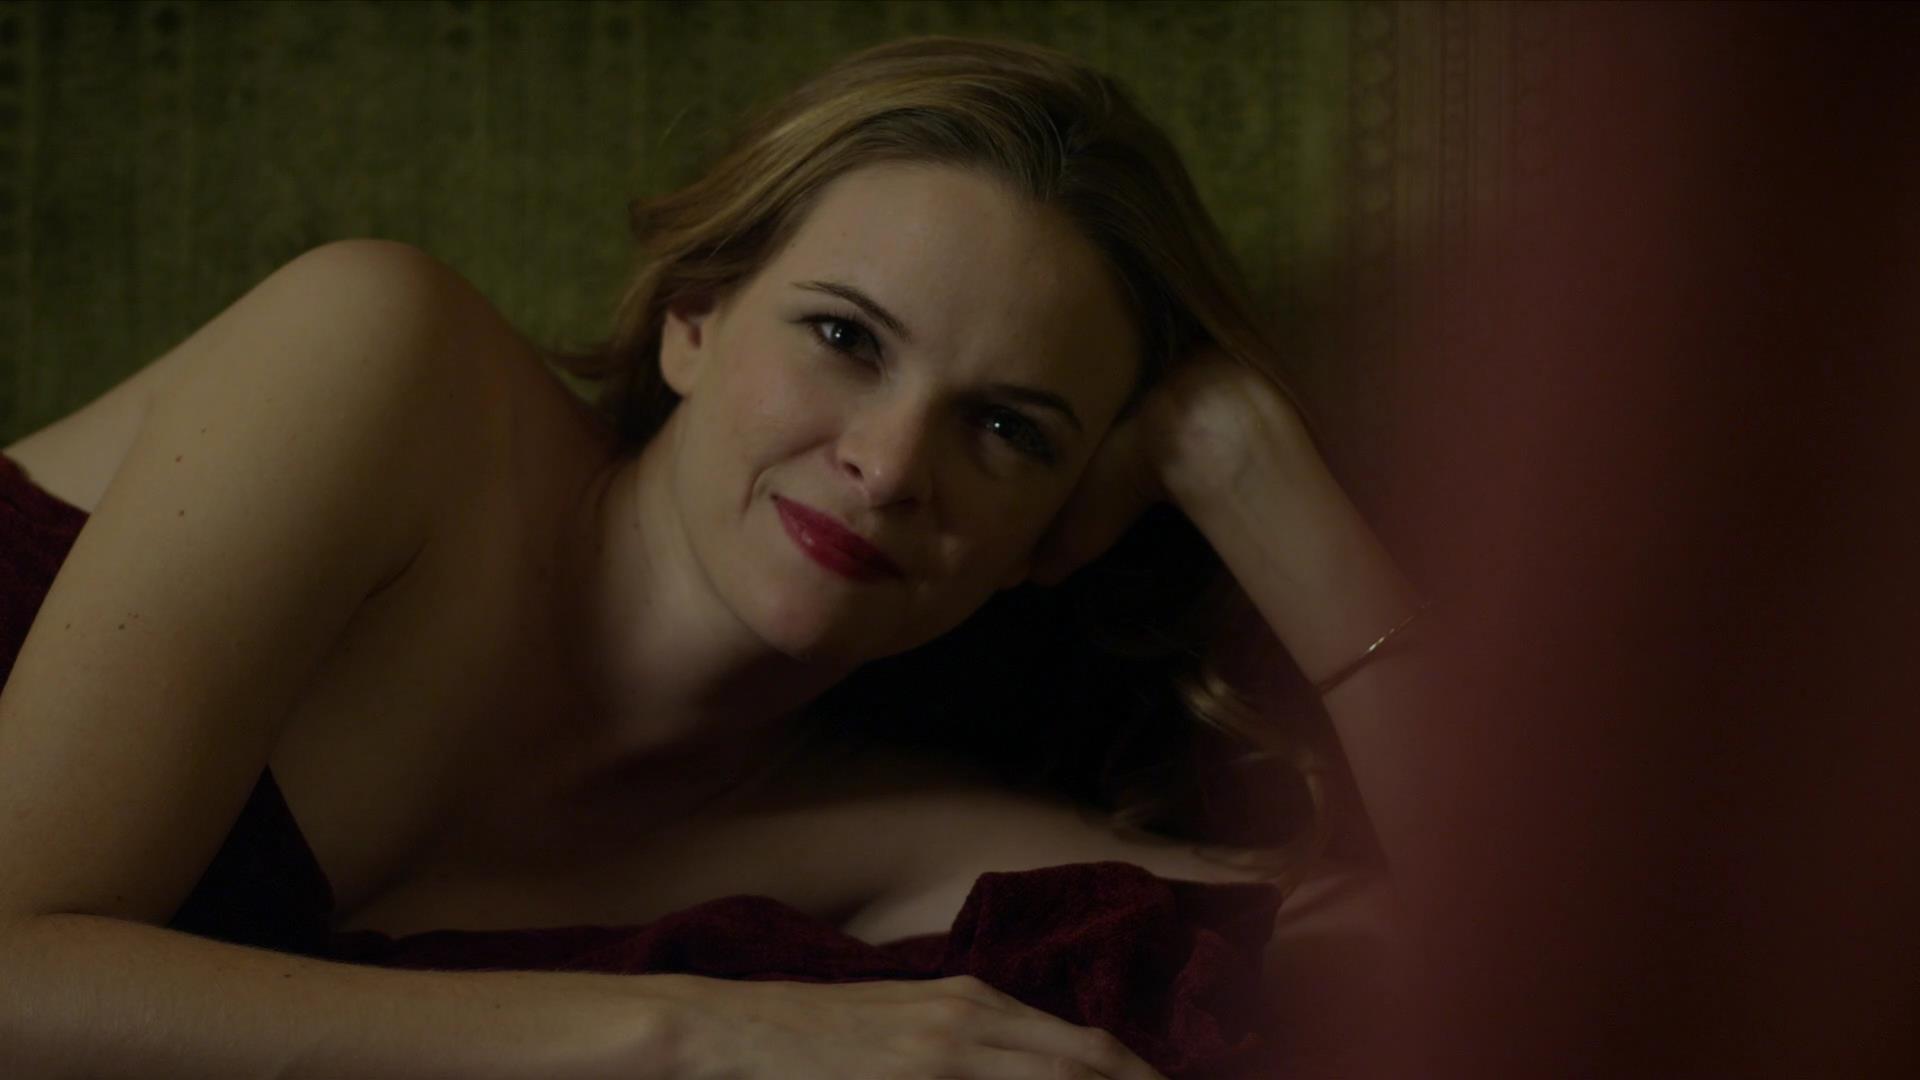 Nicole naked danielle panabaker WATCH: Danielle